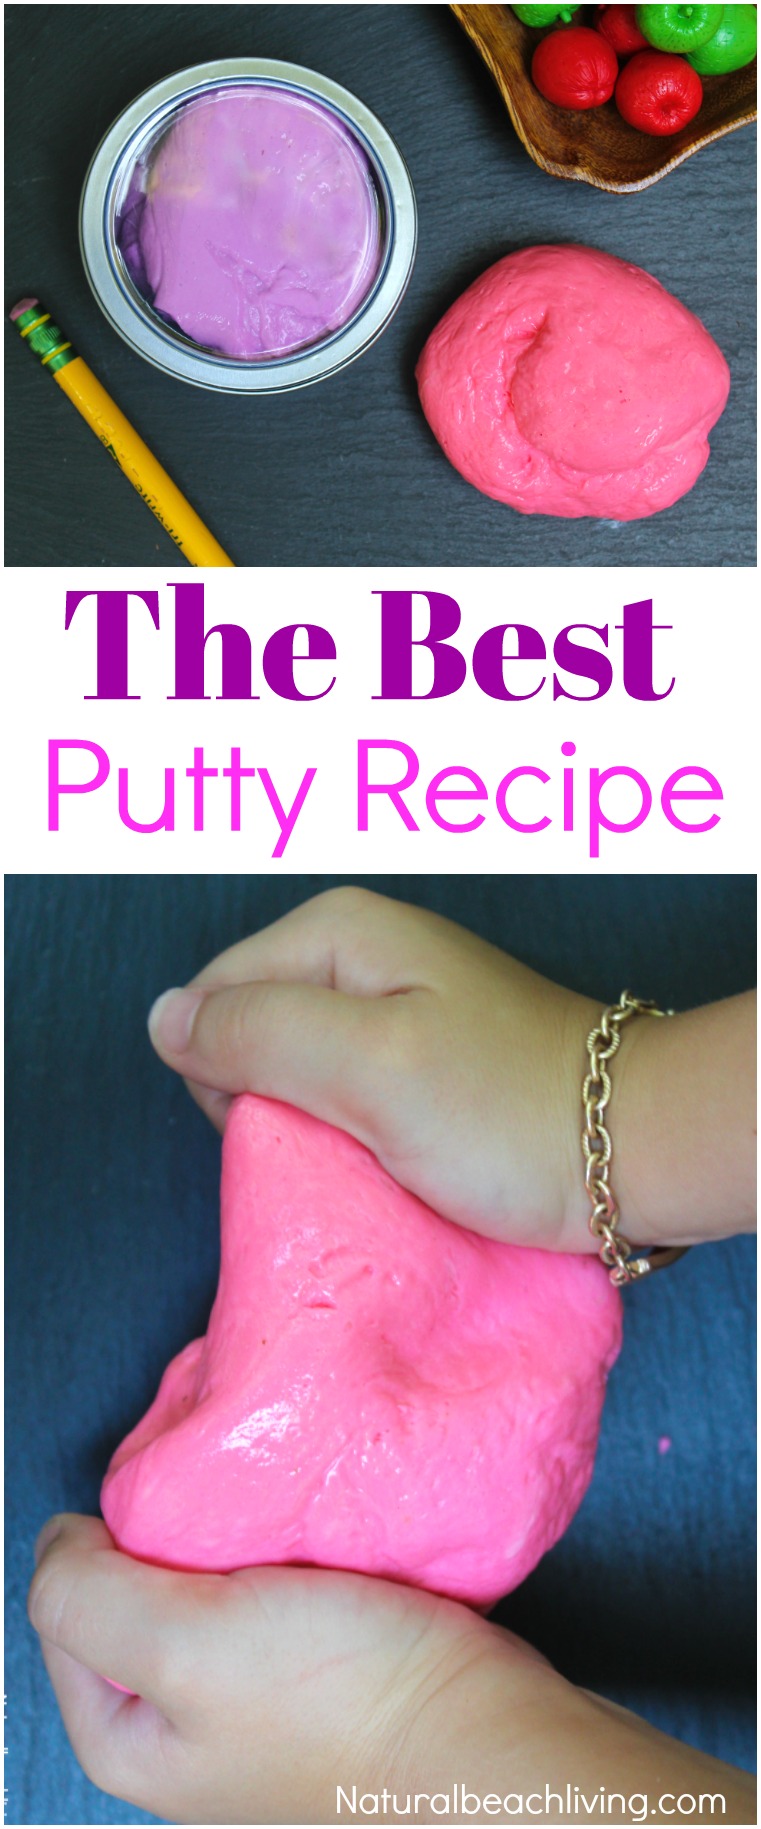 The Best Thinking Putty Recipe You'll Ever Make, Thinking Putty, DIY Thinking Putty, Silly Putty Recipe, Homemade Stress Putty, Therapy Dough, Sensory Play